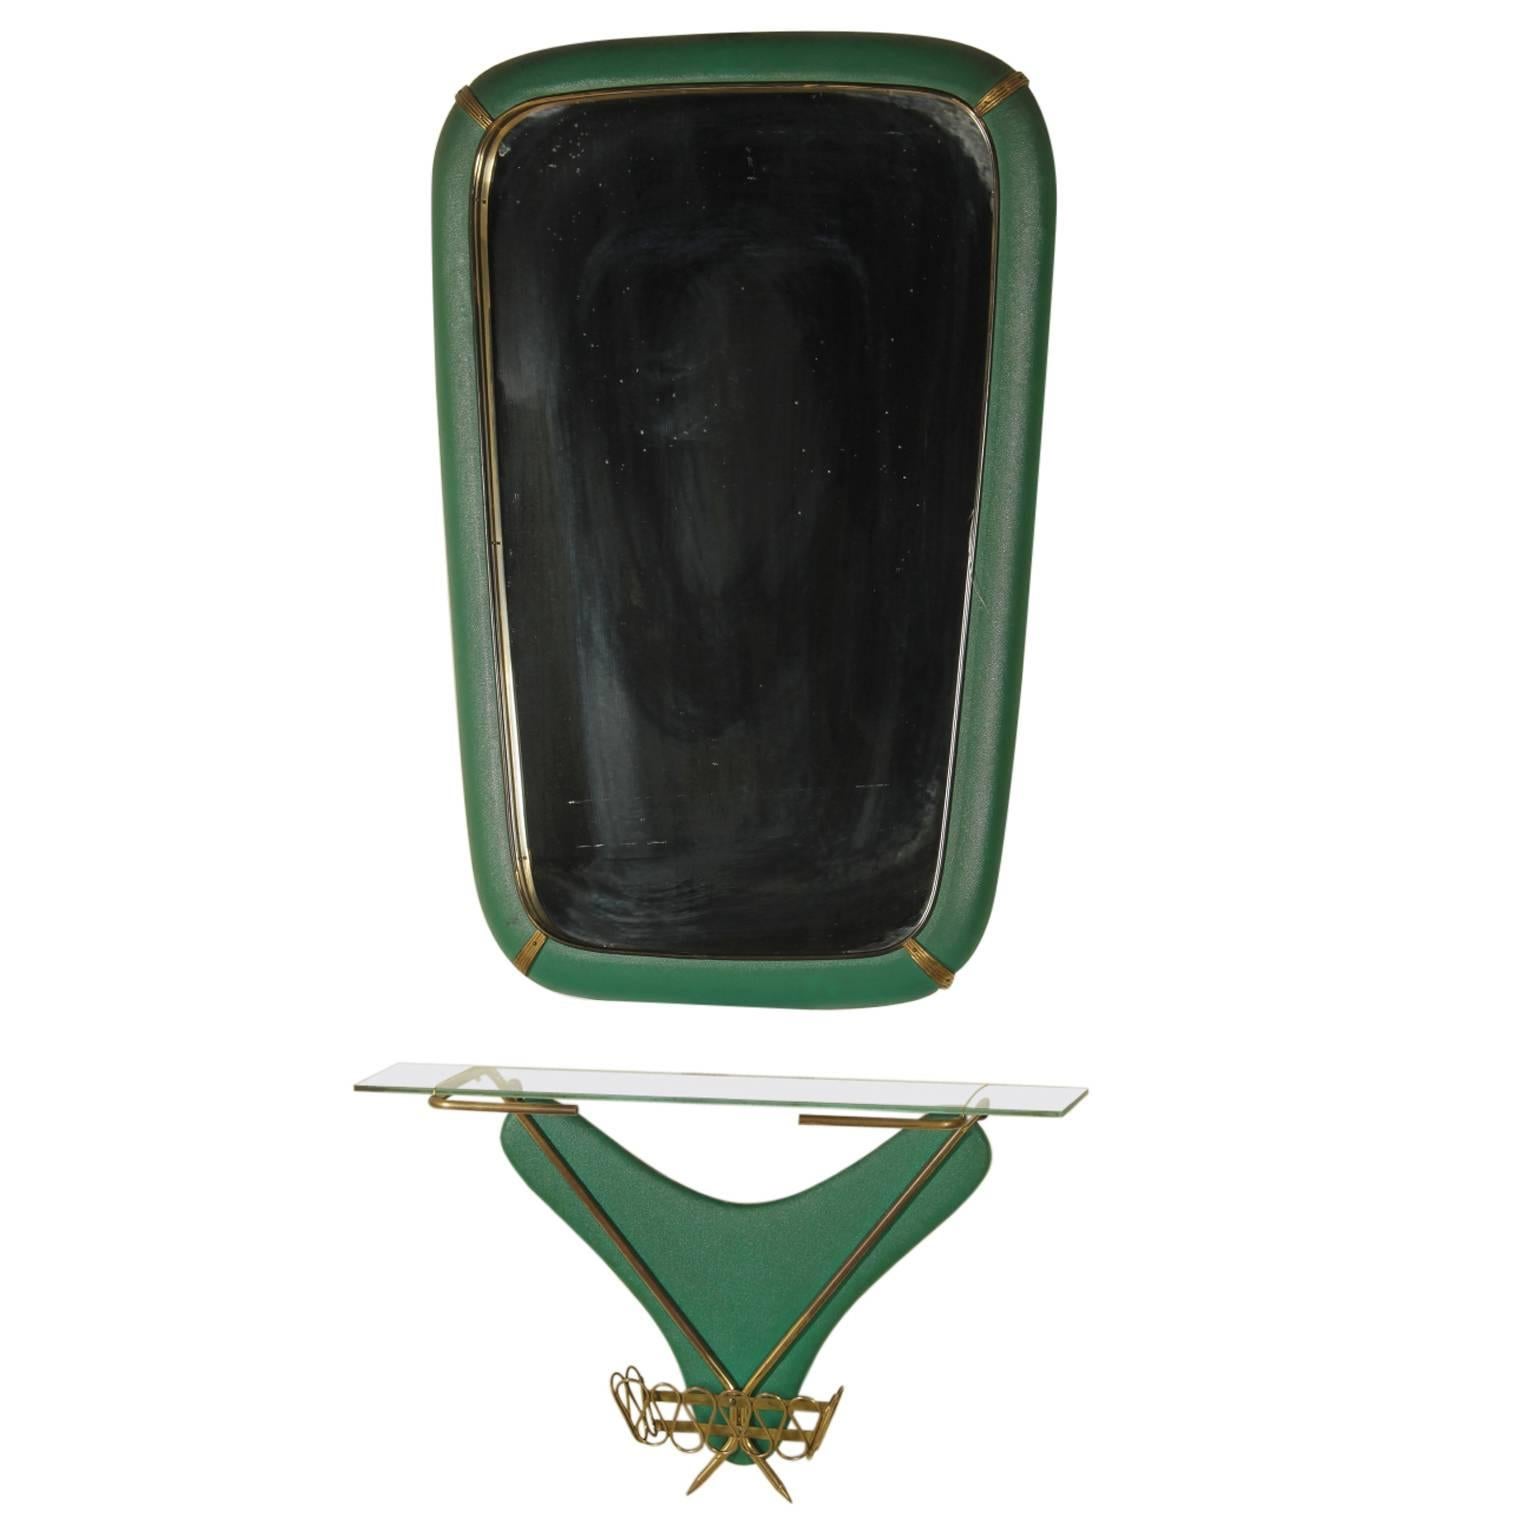 Console with Mirror Eood Skai Leatherette Brass Glass, Vintage, Italy, 1950s